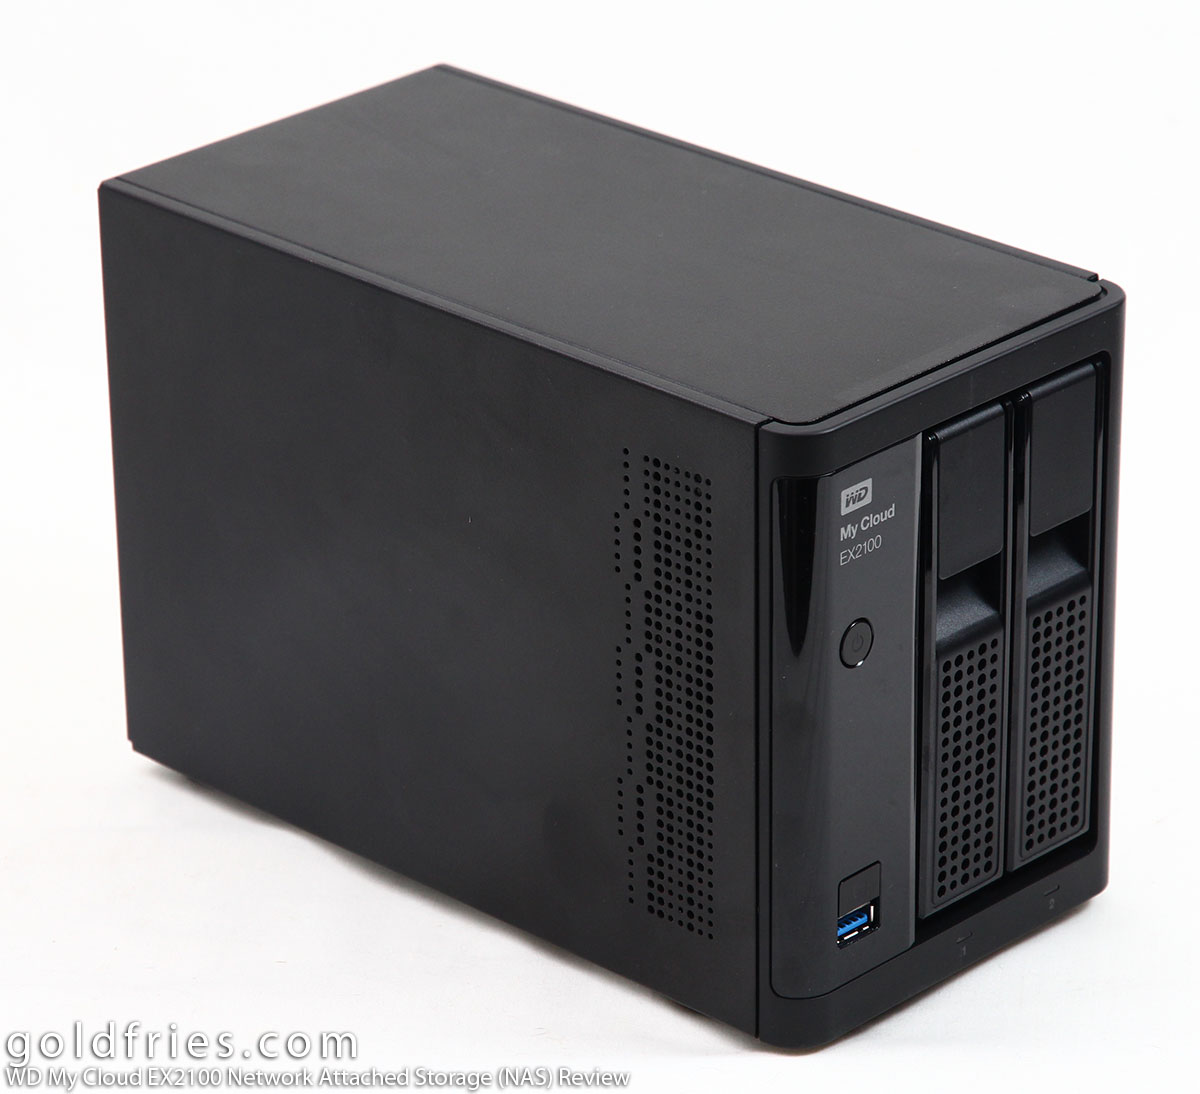 WD My Cloud EX2100 Network Attached Storage (NAS) Review